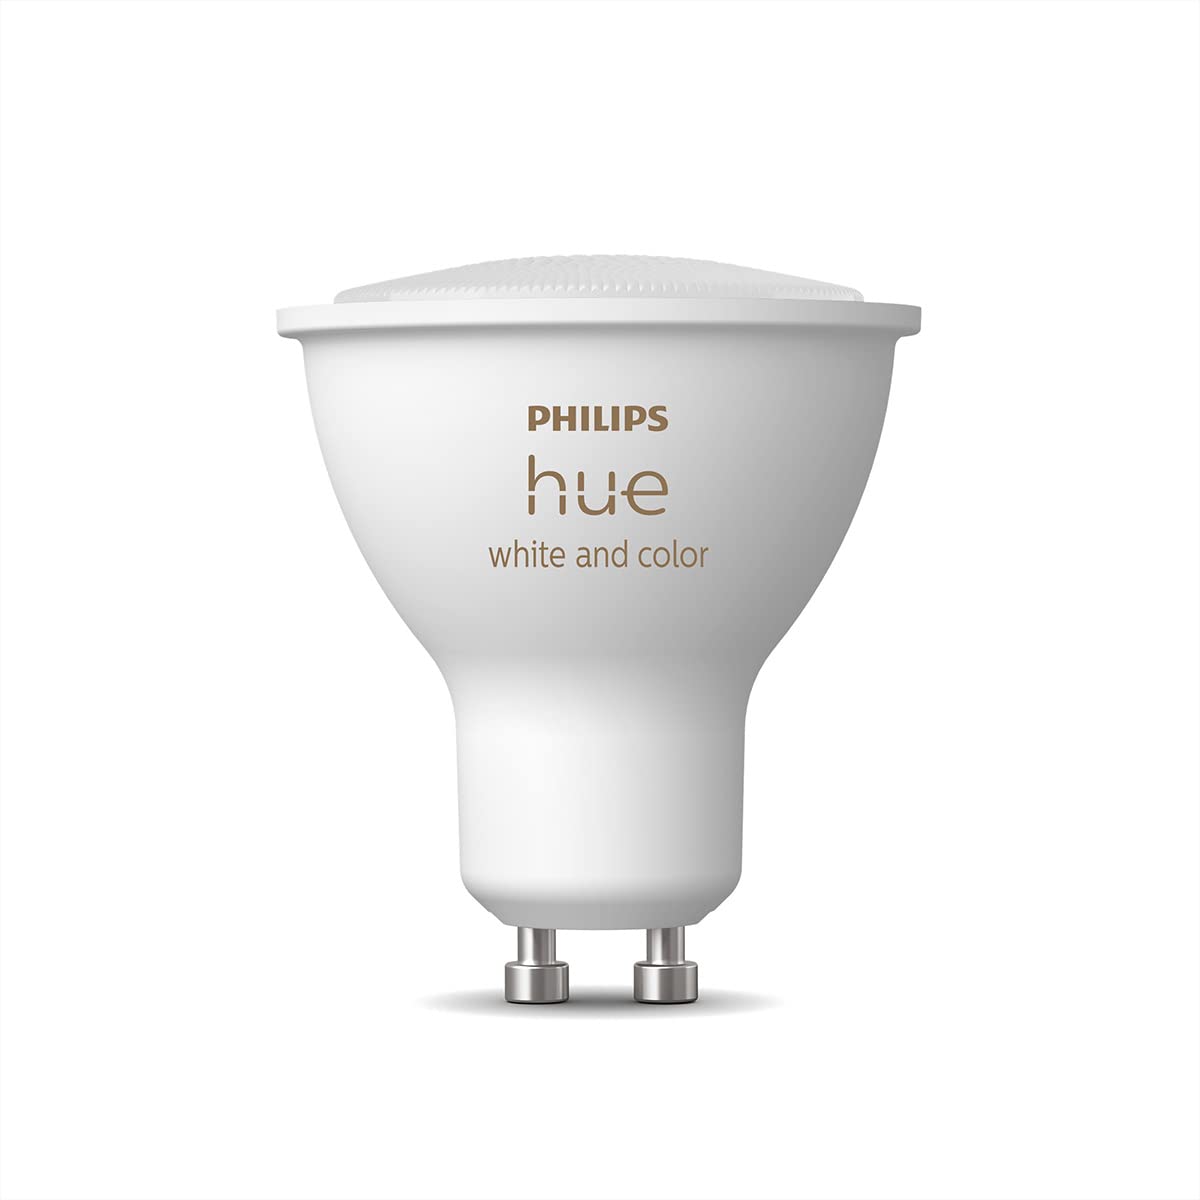 Philips Hue White & Color Ambiance LED Smart GU10 Bulb, Bluetooth & Zigbee Compatible (Hue Hub Optional), Voice Activated with Alexa, 1 Bulb